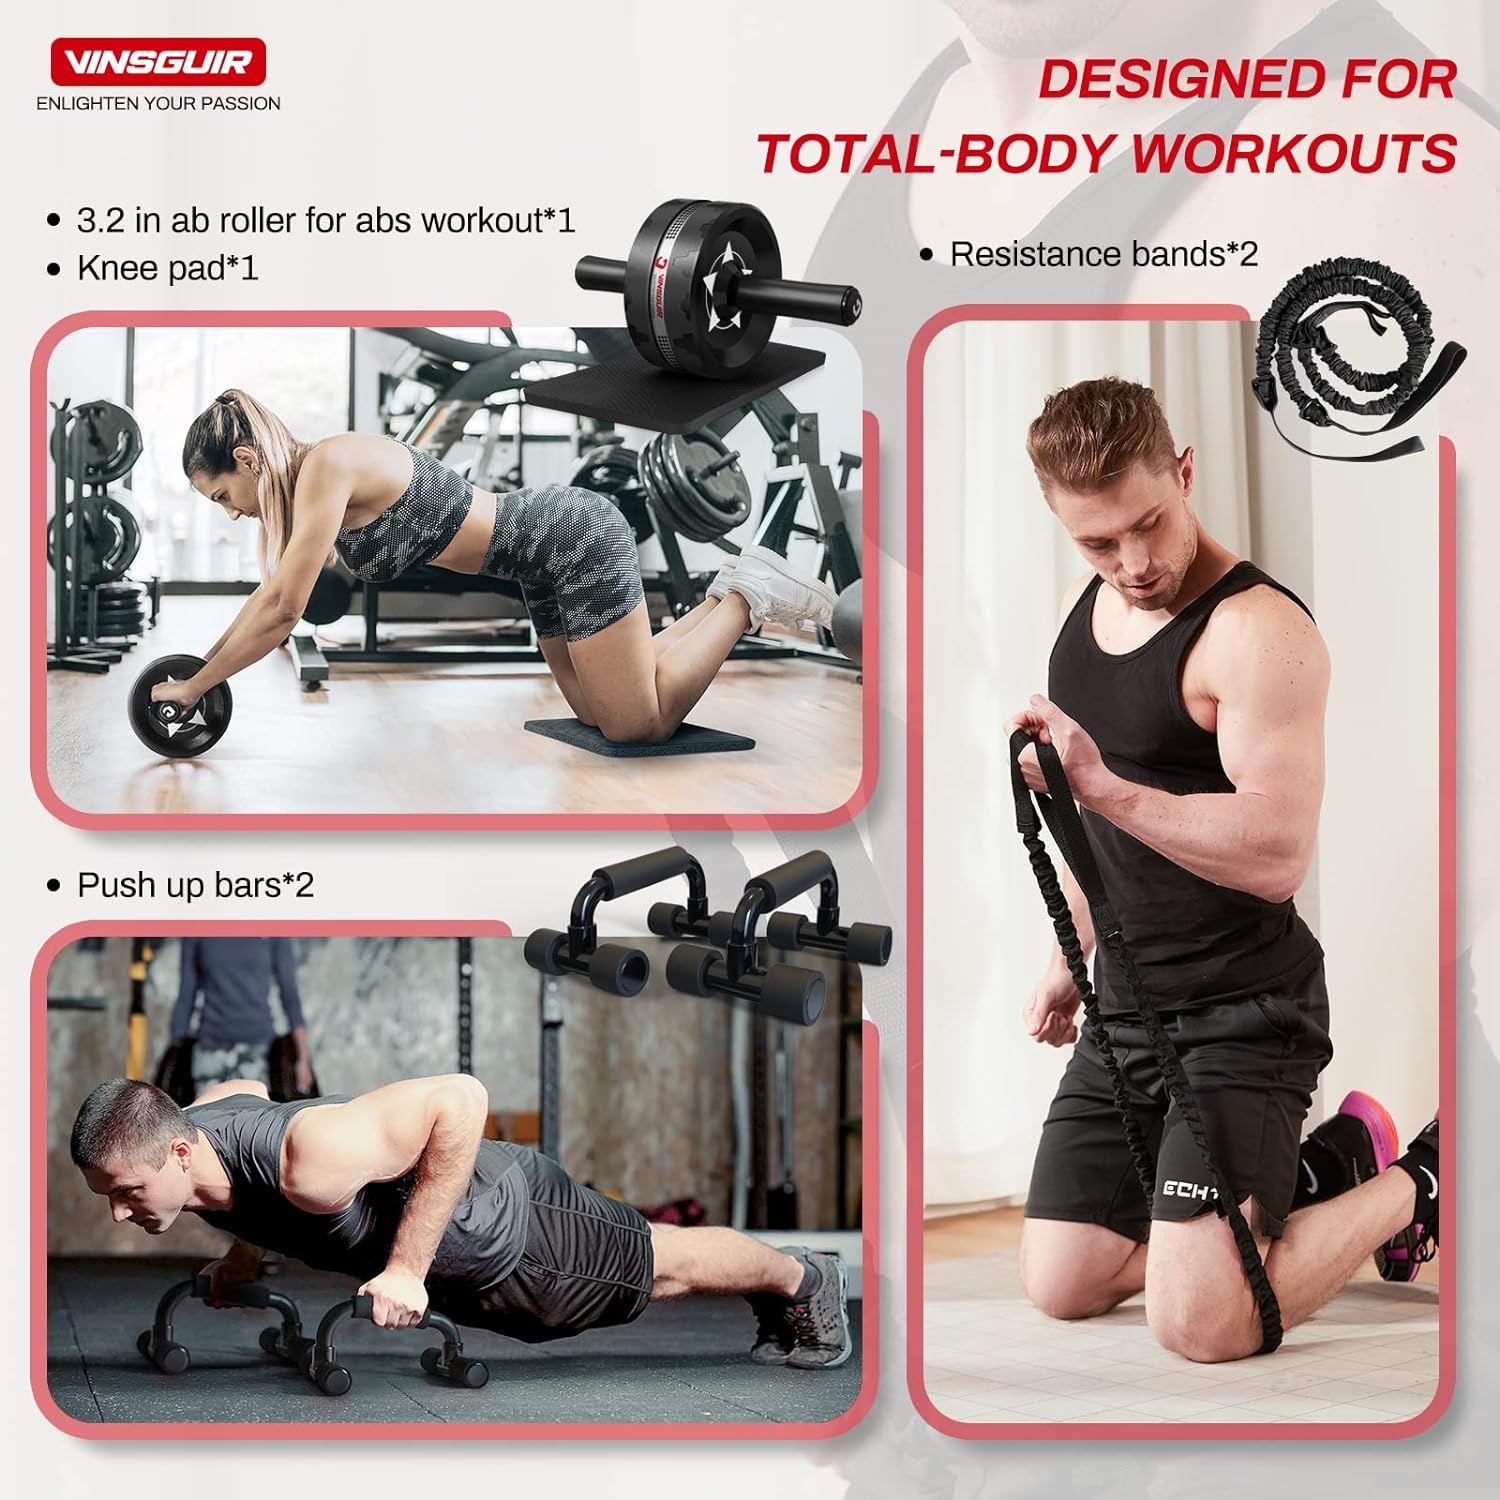 Vinsguir Ab Roller Wheel Kit - Ab Workout Equipment with Push Up Bars, Resistance Bands, Knee Mat, Home Gym Fitness Equipment for Core Strength Training, Abdominal Roller Machine with Gym Accessories for Men  Women